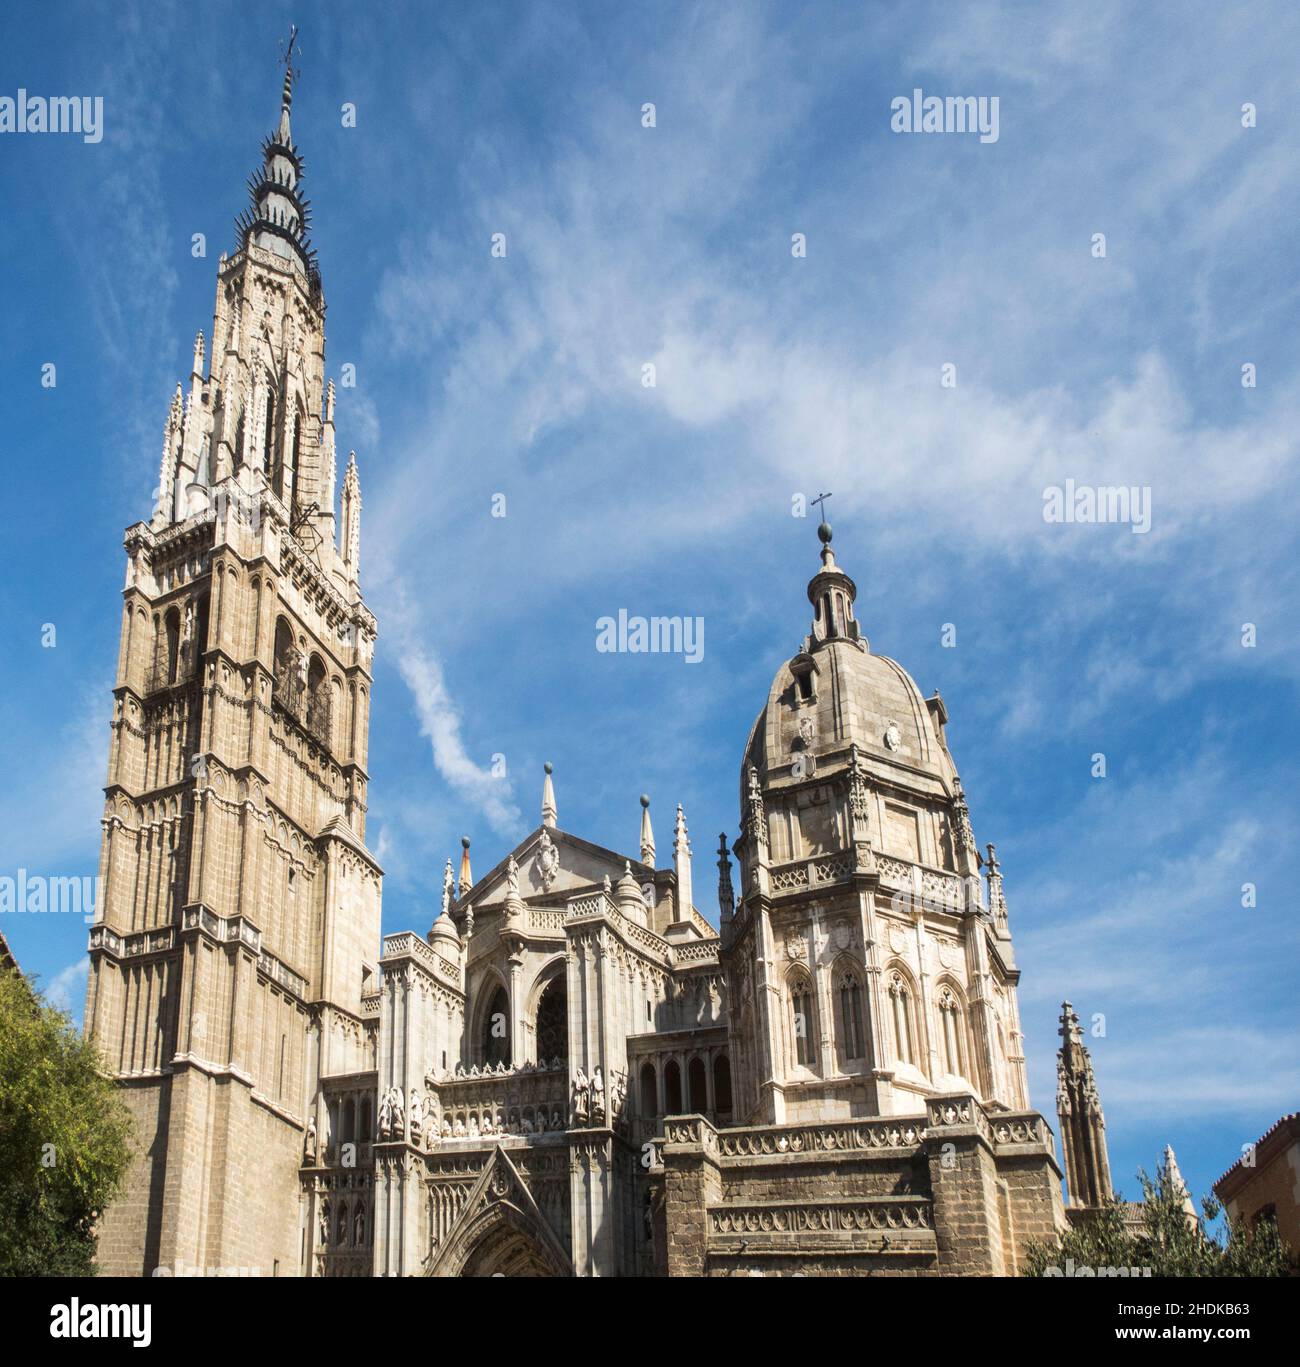 Toletum hi-res stock photography and images - Alamy